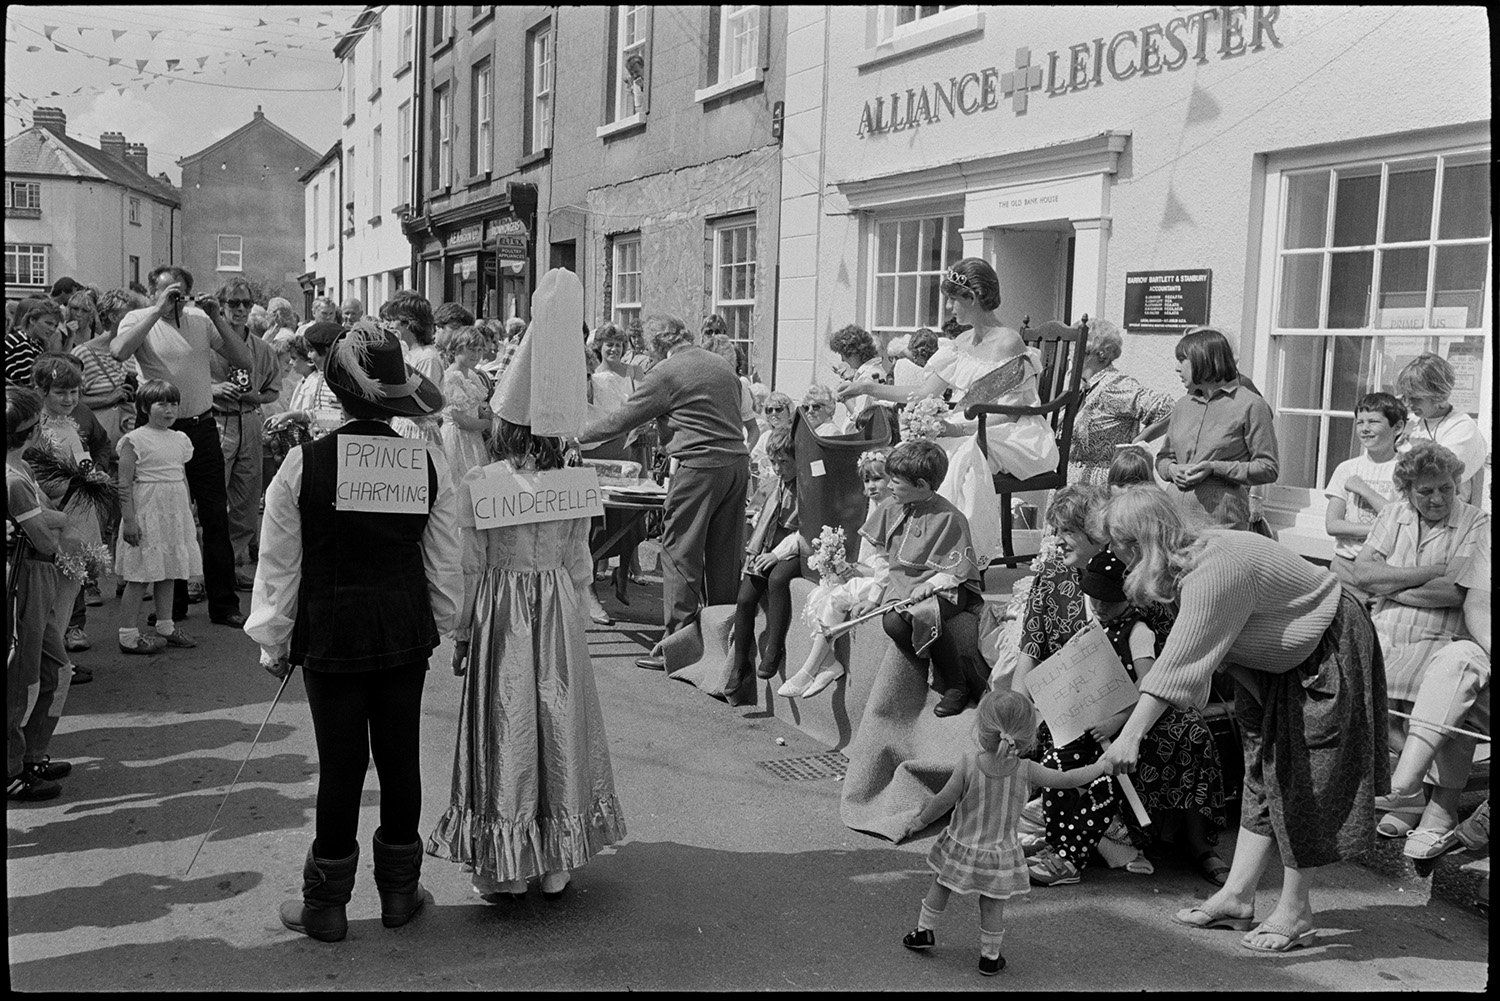 Procession, Queen and attendants parading , fancy dress prizes women spectators laughing !
[People gathered in the street outside the Alliance and Leicester Bank for Chulmleigh Fair,  looking at two children dressed as Prince Charming and Cinderella. A man is taking a photograph of them. Children in fancy dress and Debbie Hawkins, the Chulmleigh Fair Queen, are sitting on a podium and the pavement nearby.]